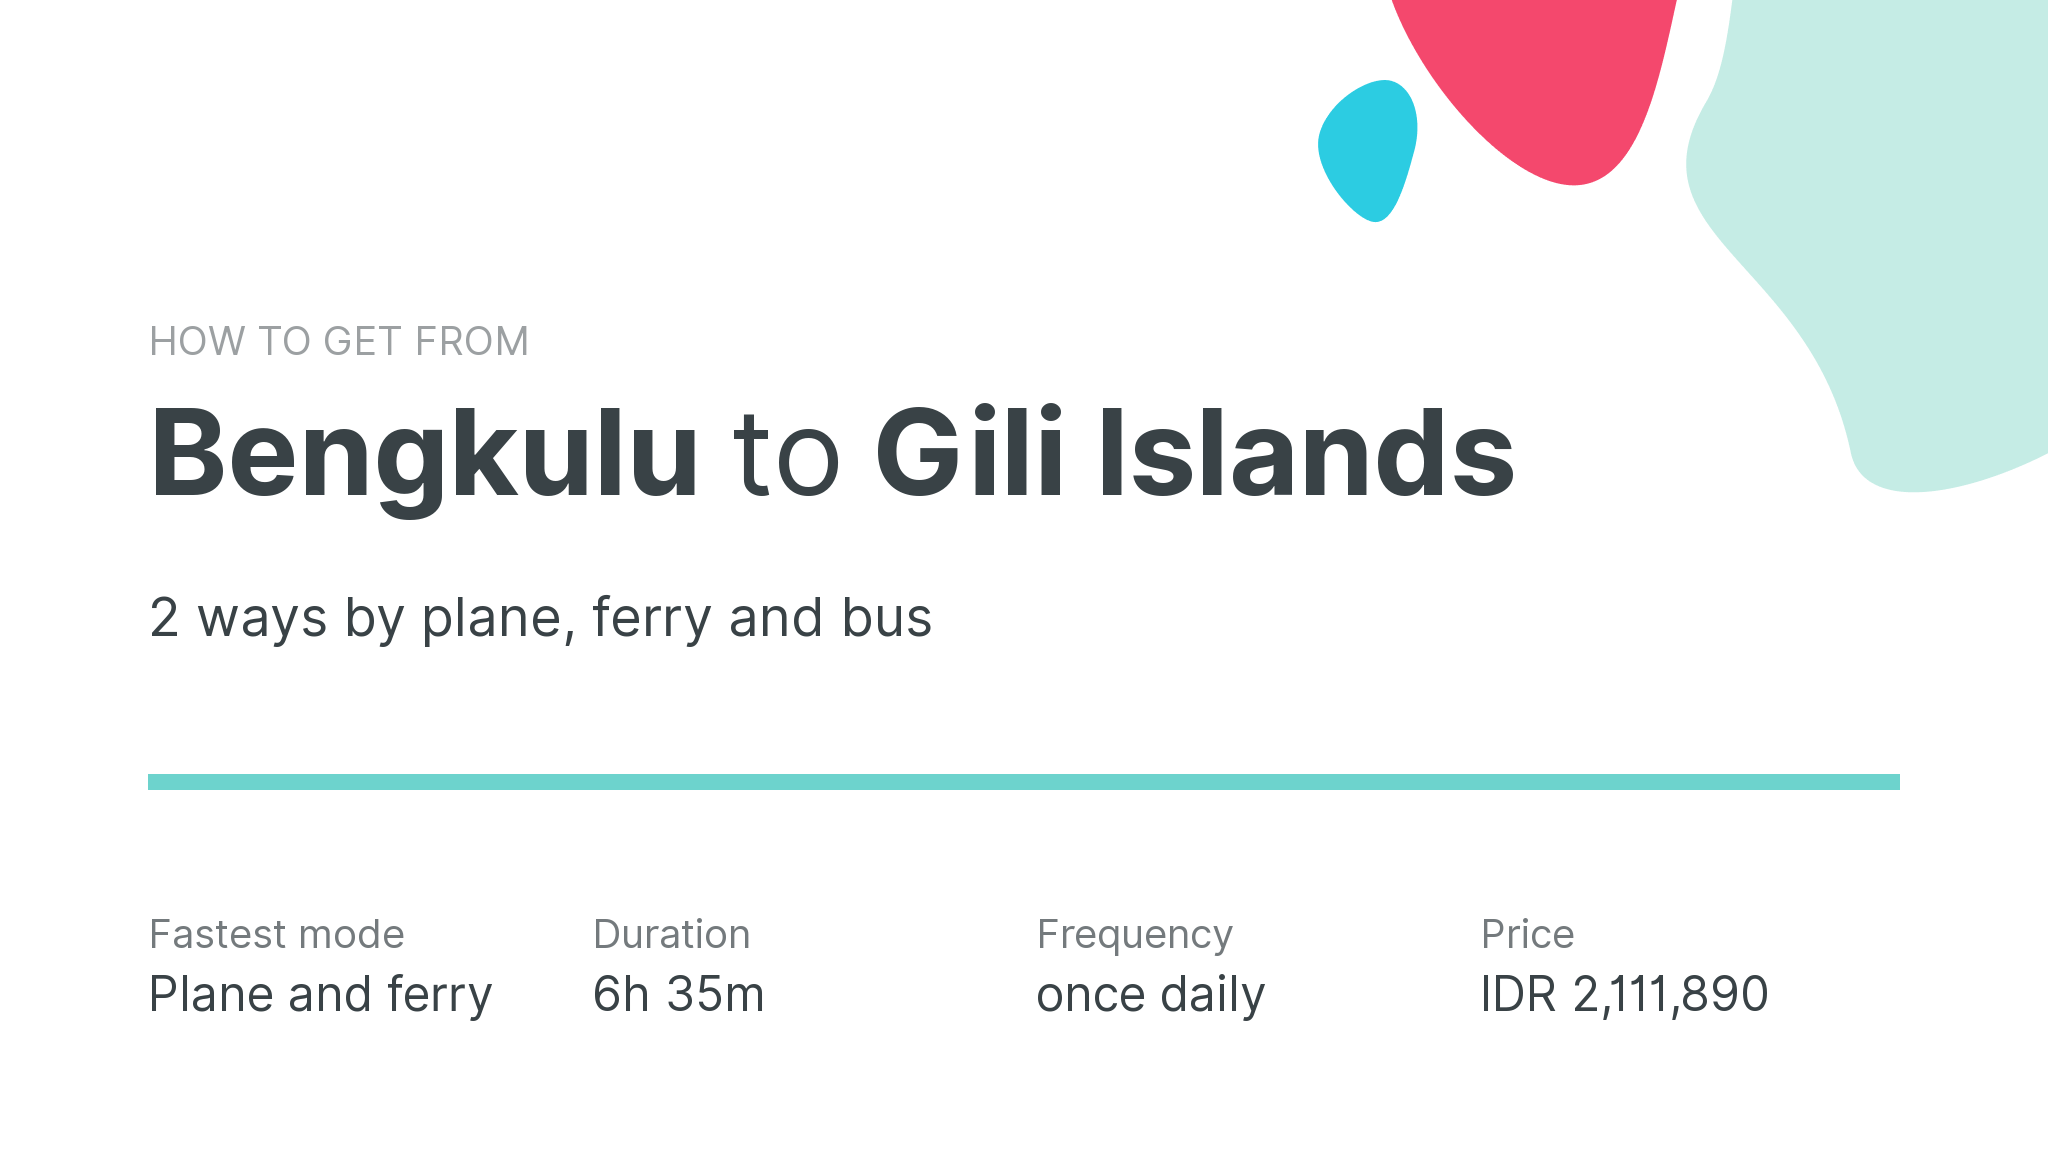 How do I get from Bengkulu to Gili Islands